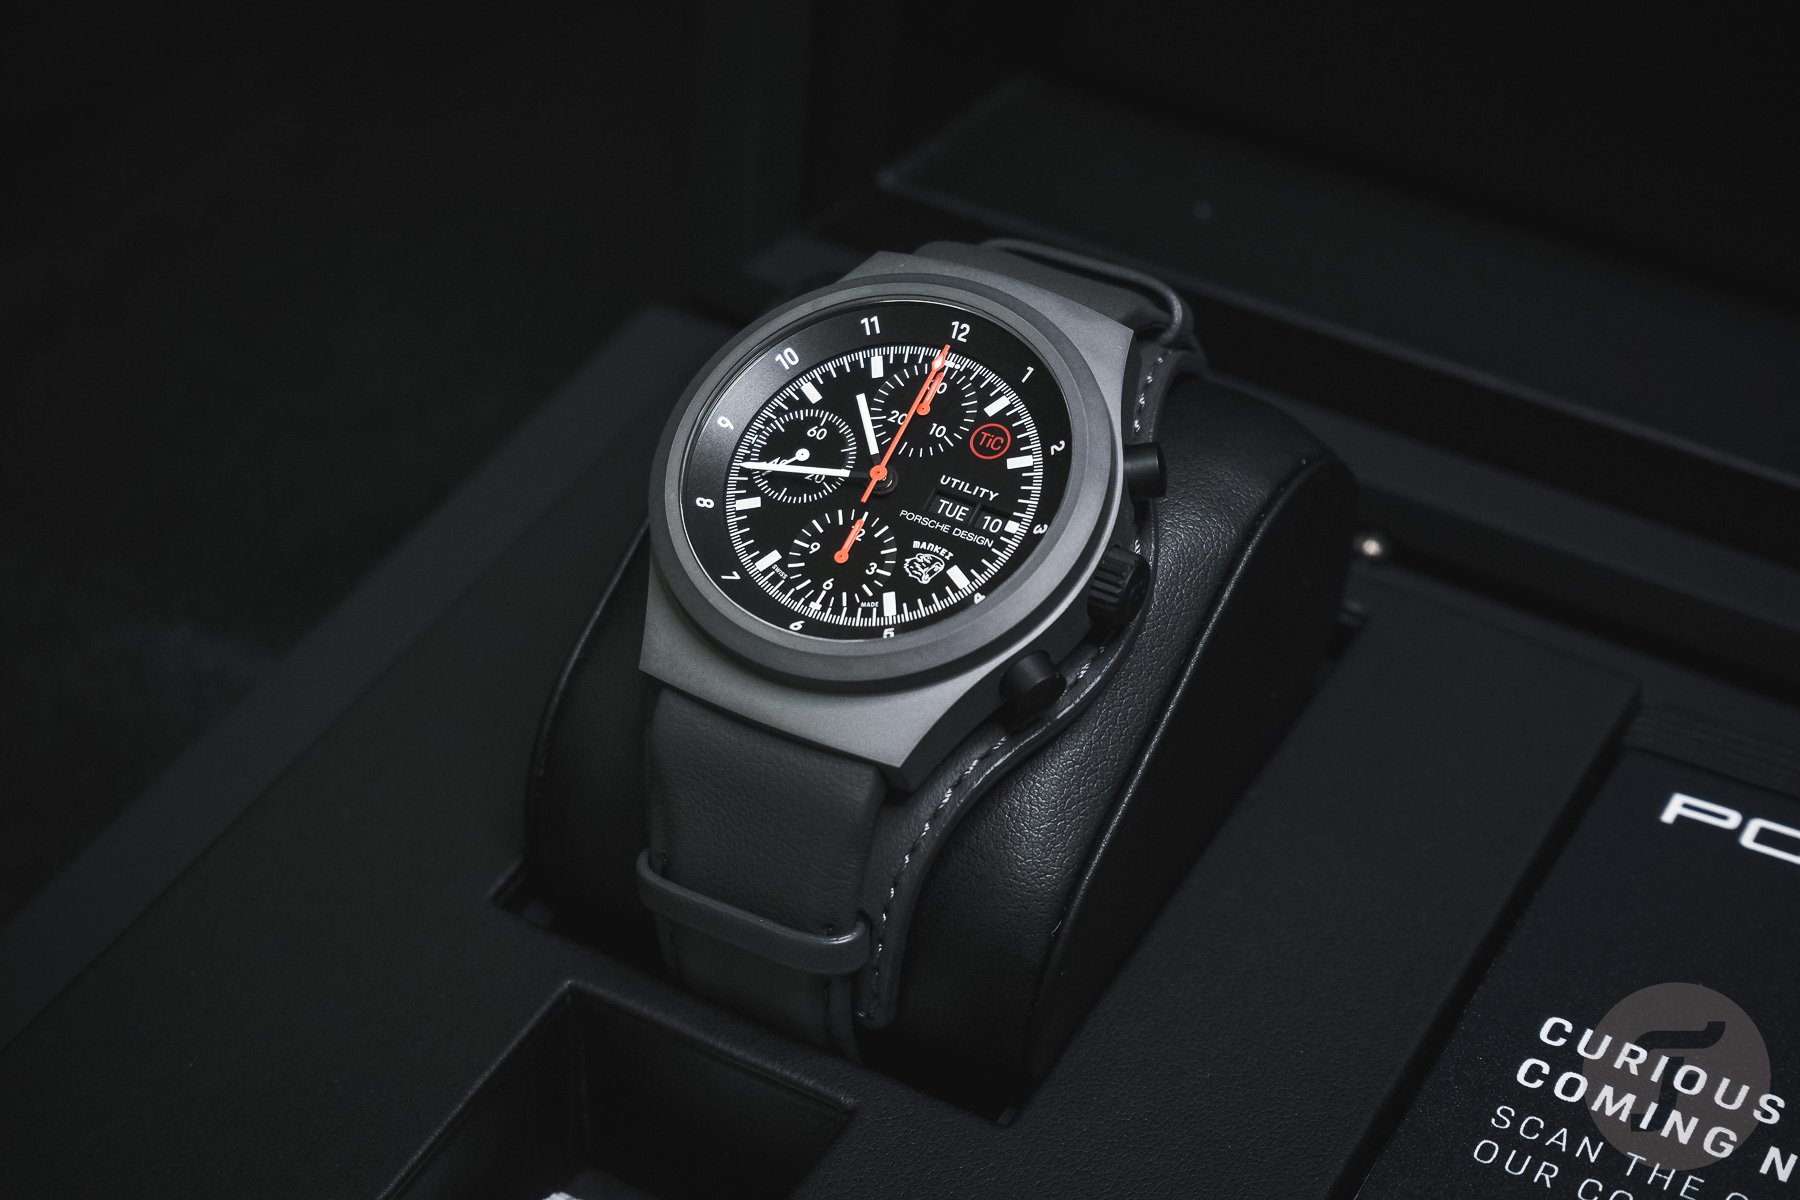 Introducing The Military-Inspired Porsche Design Chronograph 1 Utility